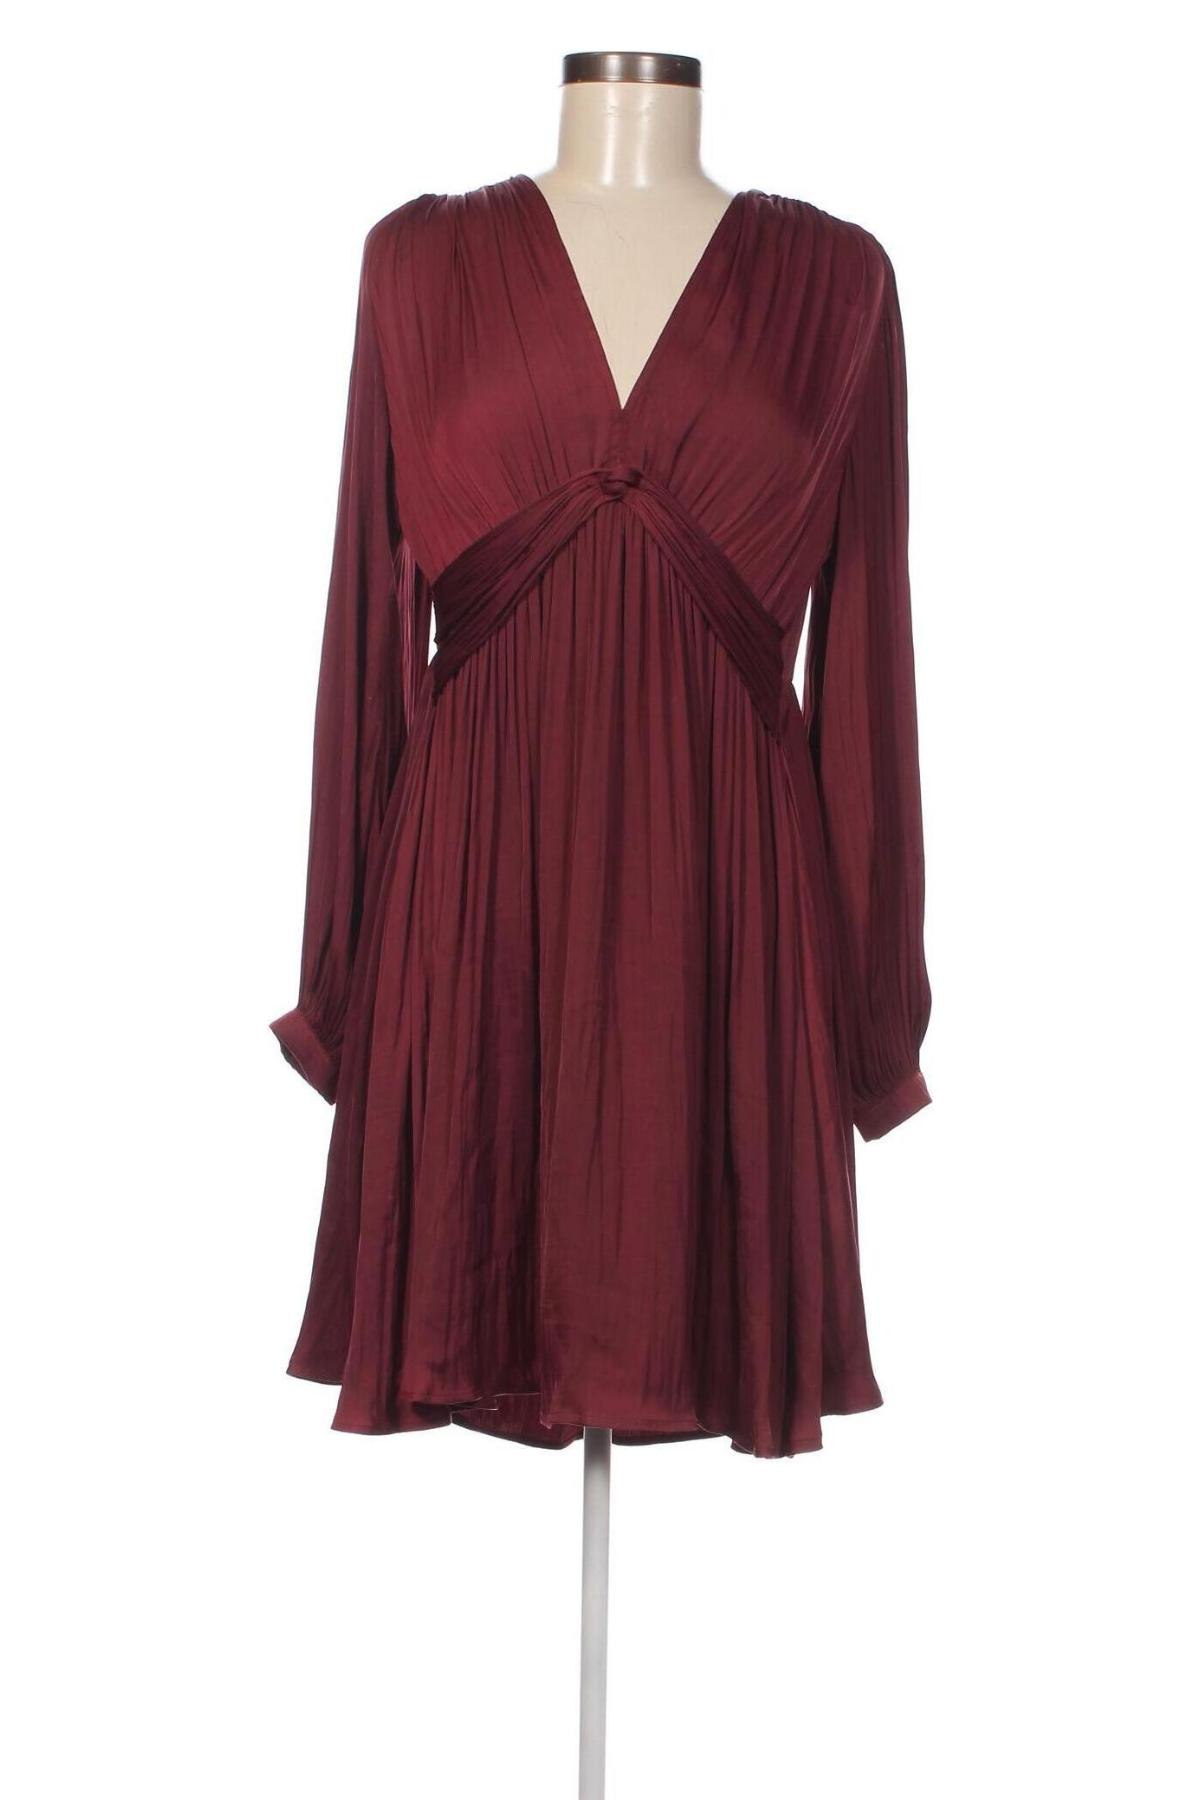 Kleid Guido Maria Kretschmer for About You, Größe M, Farbe Rot, Preis € 68,04